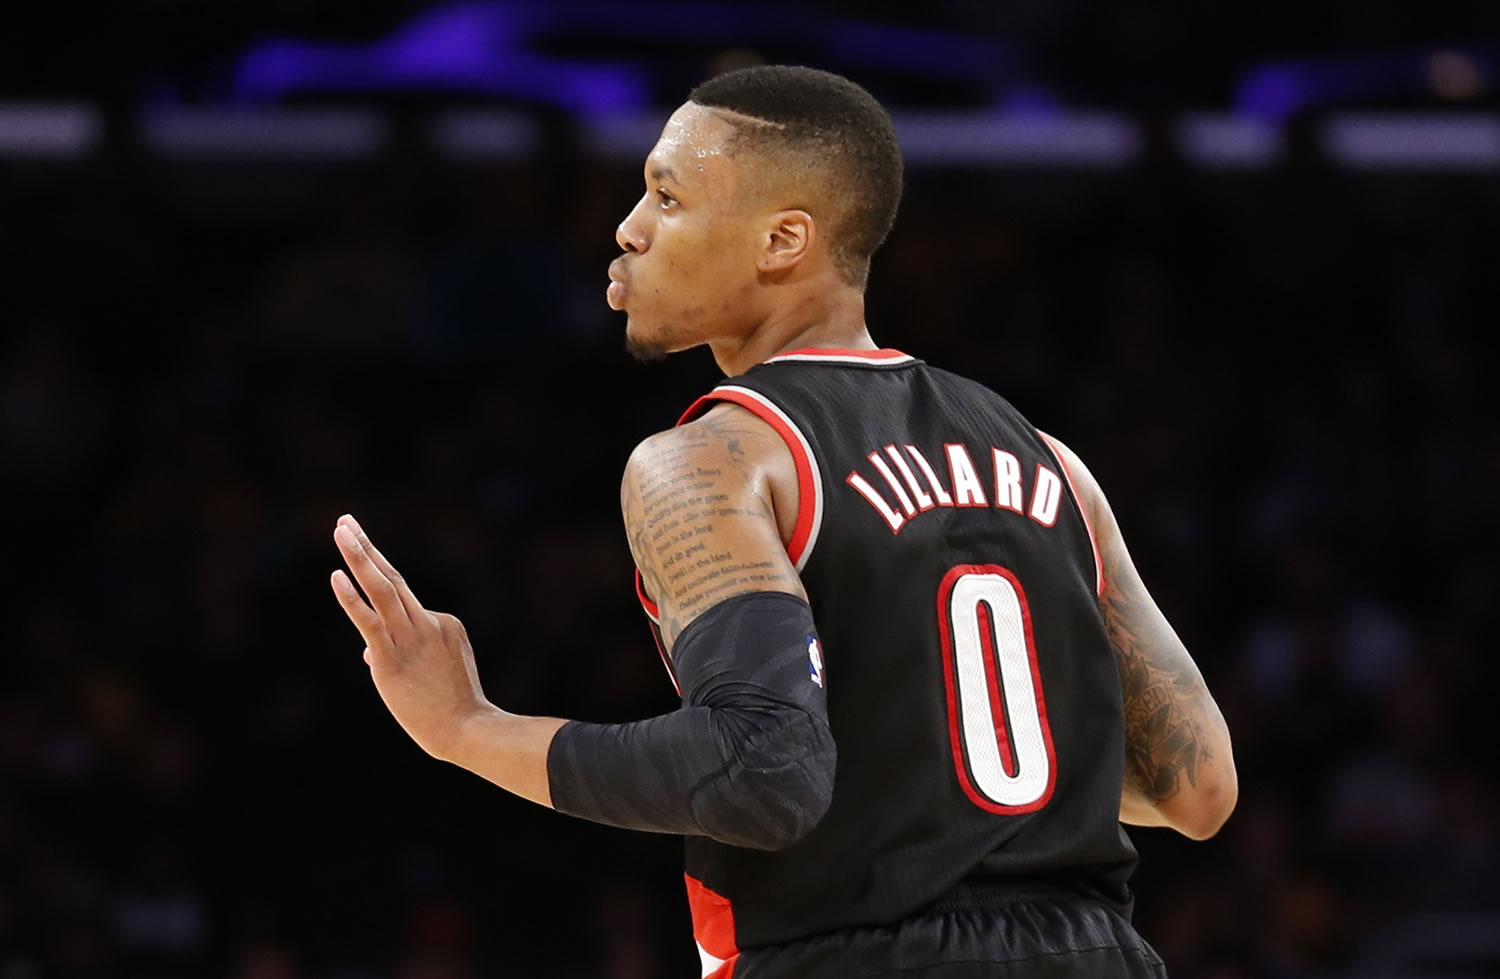 Portland Trail Blazers guard Damian Lillard reacts after making a three-pointer against the Los Angeles Lakers Tuesday in Los Angeles.